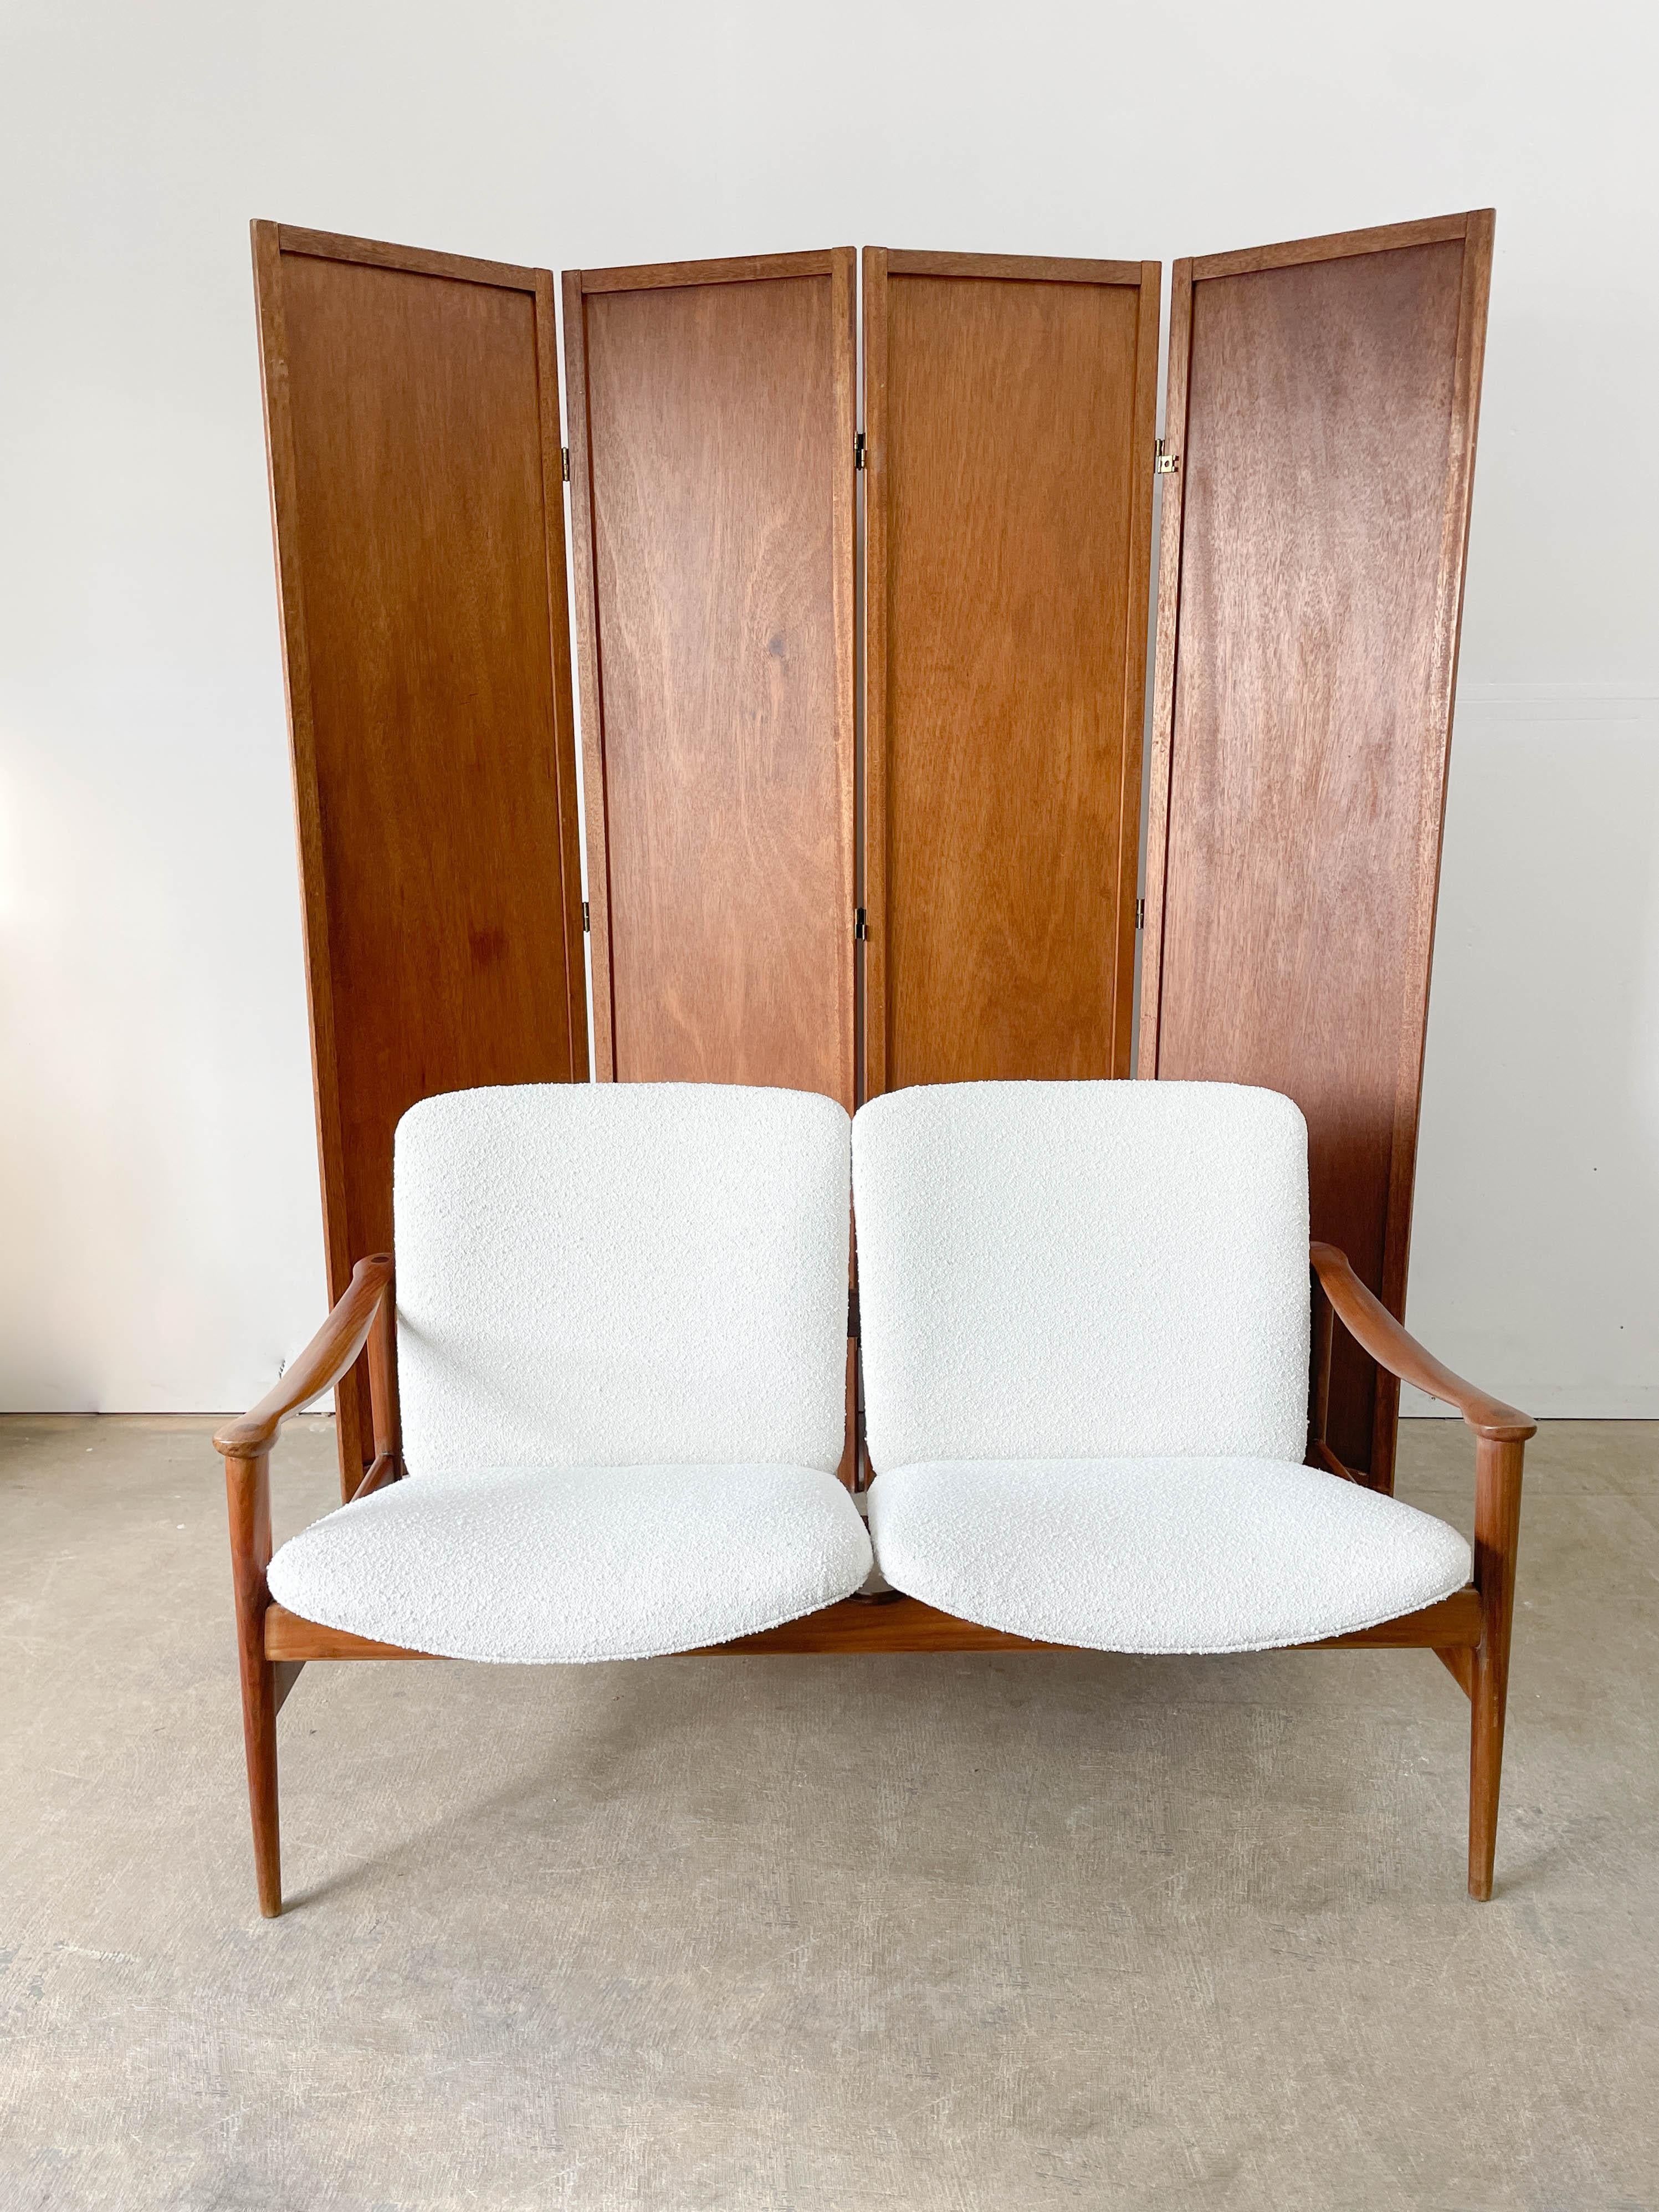 This is a sleek and comfortable loveseat that stands on its own as a beautiful piece of mid-century modern furniture. Although not formally attributed, this loveseat is clearly in the style of Frederik A. Kayser's 711 chairs for Vatne Mobelfabrik.